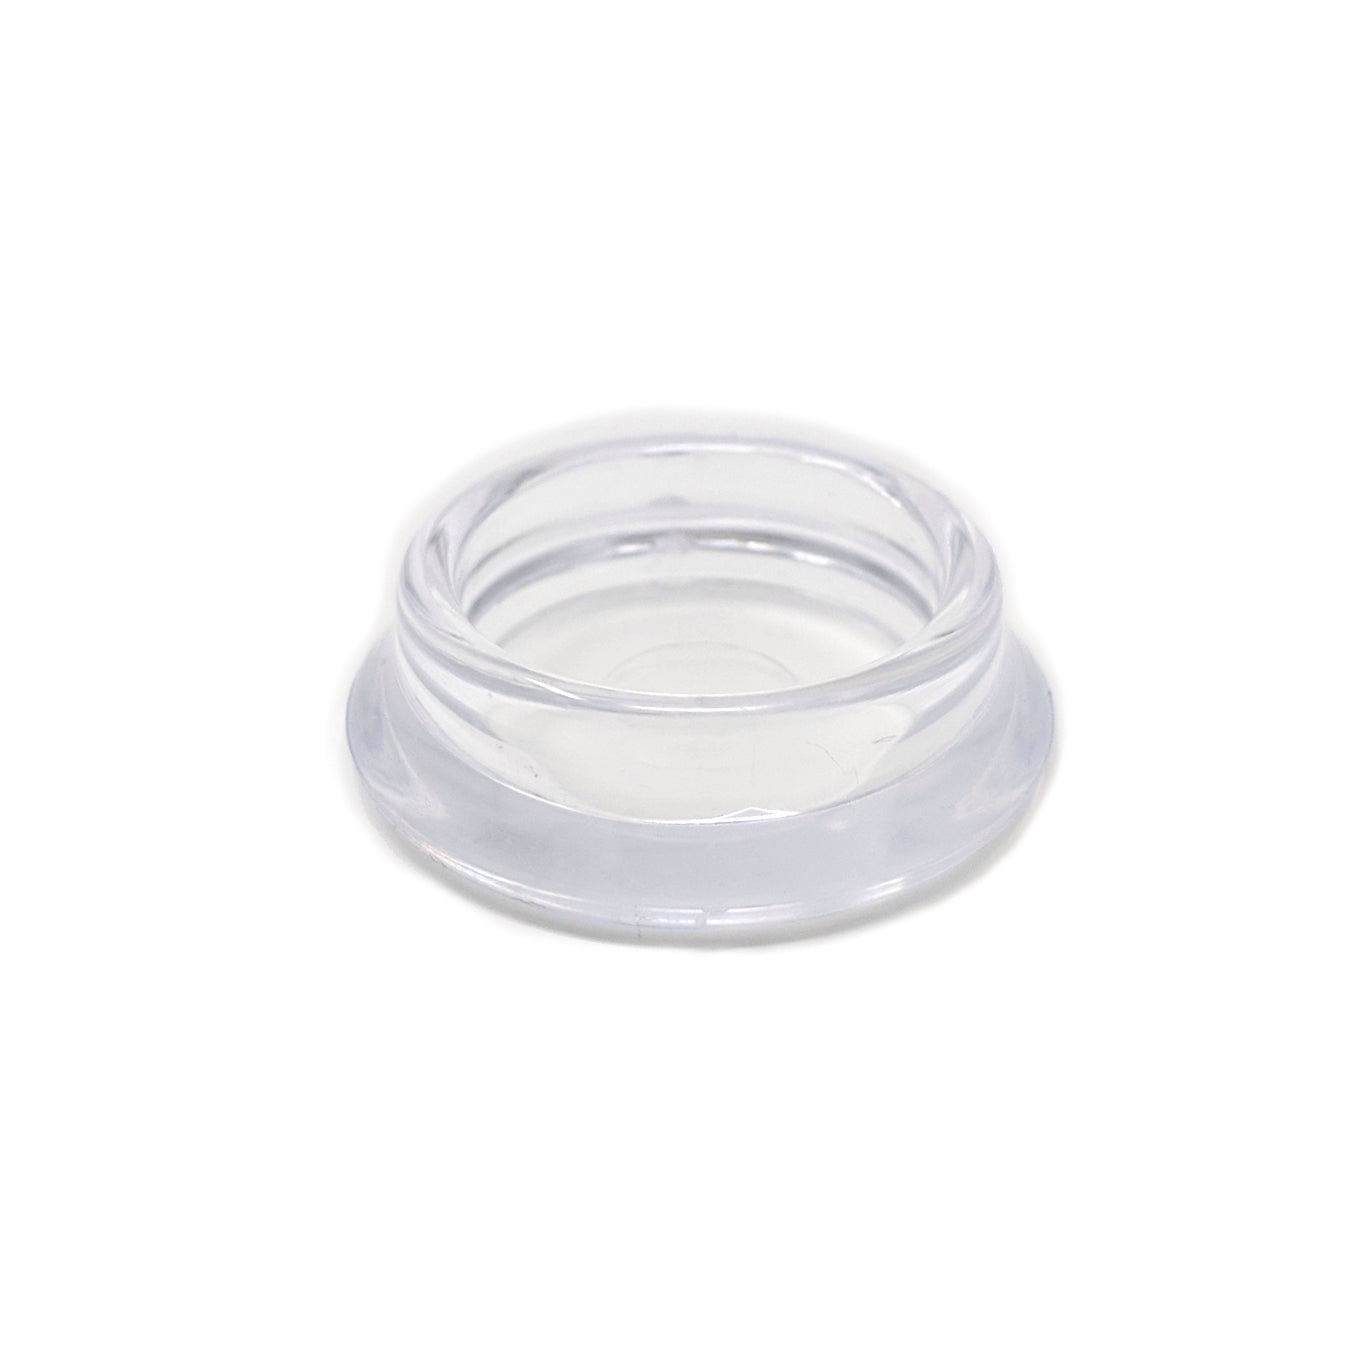 23mm Clear Round Furniture Leg Cups Floor Carpet Protector - Made in Germany - Keay Vital Parts